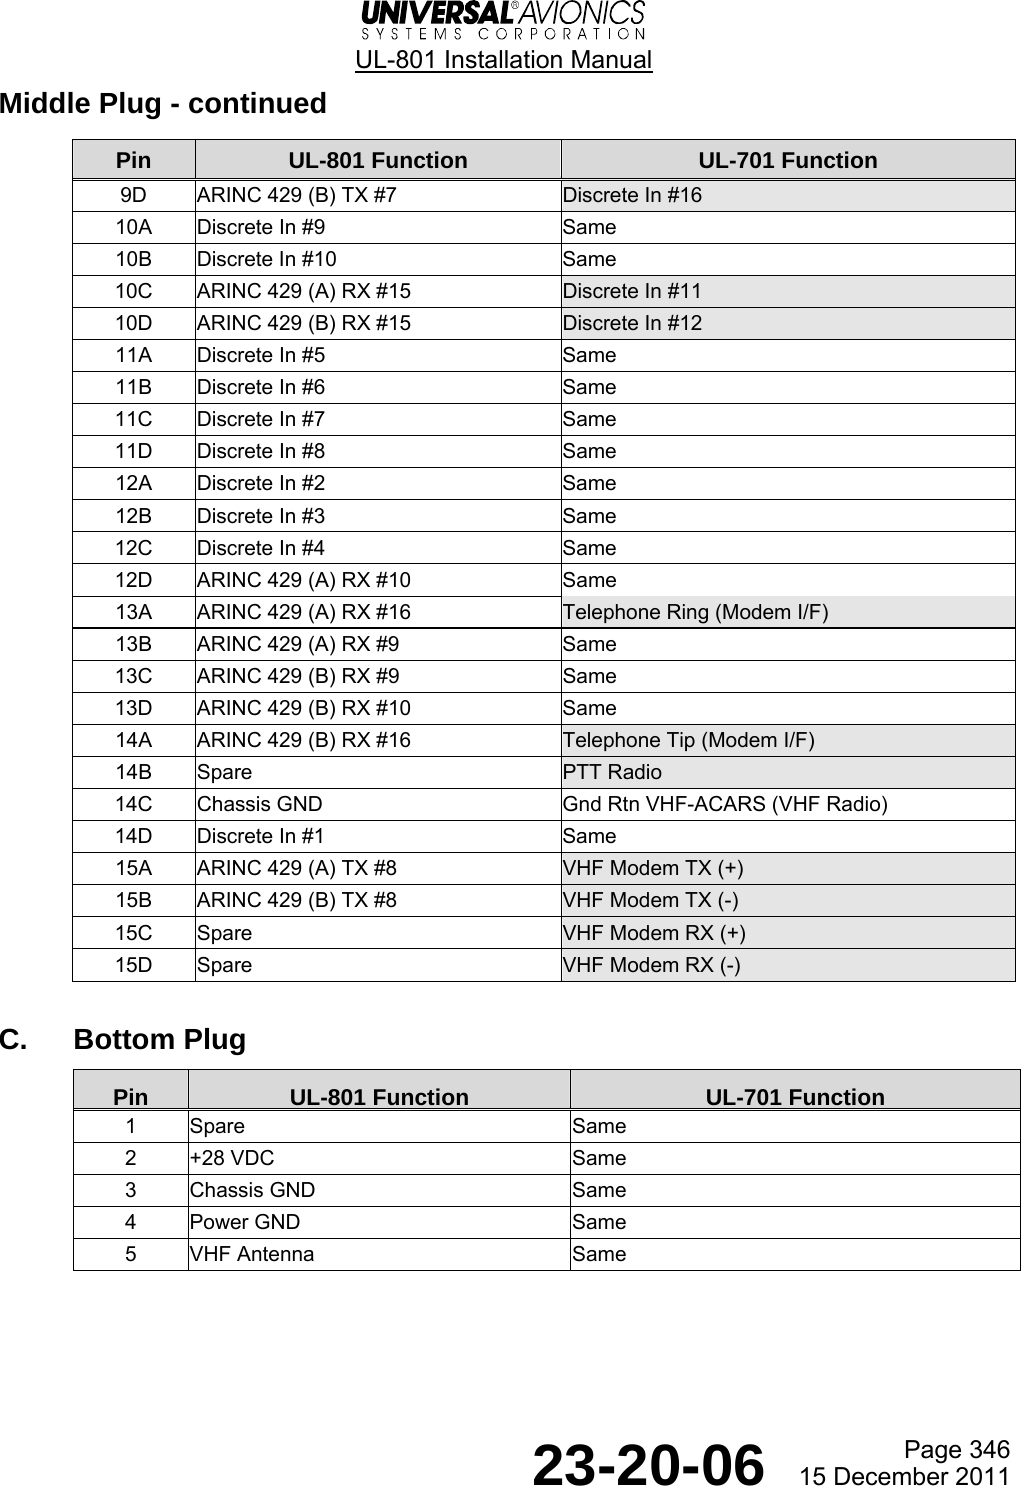  UL-801 Installation Manual  Page 346  23-20-06  15 December 2011 Middle Plug - continued Pin  UL-801 Function  UL-701 Function 9D  ARINC 429 (B) TX #7  Discrete In #16 10A  Discrete In #9  Same 10B  Discrete In #10  Same 10C  ARINC 429 (A) RX #15  Discrete In #11 10D  ARINC 429 (B) RX #15  Discrete In #12 11A  Discrete In #5  Same 11B  Discrete In #6  Same 11C  Discrete In #7  Same 11D  Discrete In #8  Same 12A  Discrete In #2  Same 12B  Discrete In #3  Same 12C  Discrete In #4  Same 12D  ARINC 429 (A) RX #10  Same 13A  ARINC 429 (A) RX #16  Telephone Ring (Modem I/F) 13B  ARINC 429 (A) RX #9  Same 13C  ARINC 429 (B) RX #9  Same 13D  ARINC 429 (B) RX #10  Same 14A  ARINC 429 (B) RX #16  Telephone Tip (Modem I/F) 14B Spare  PTT Radio 14C  Chassis GND  Gnd Rtn VHF-ACARS (VHF Radio) 14D  Discrete In #1  Same 15A  ARINC 429 (A) TX #8  VHF Modem TX (+) 15B  ARINC 429 (B) TX #8  VHF Modem TX (-) 15C Spare  VHF Modem RX (+) 15D Spare  VHF Modem RX (-)  C. Bottom Plug Pin  UL-801 Function UL-701 Function 1 Spare  Same 2 +28 VDC  Same 3 Chassis GND  Same 4 Power GND  Same 5 VHF Antenna  Same  